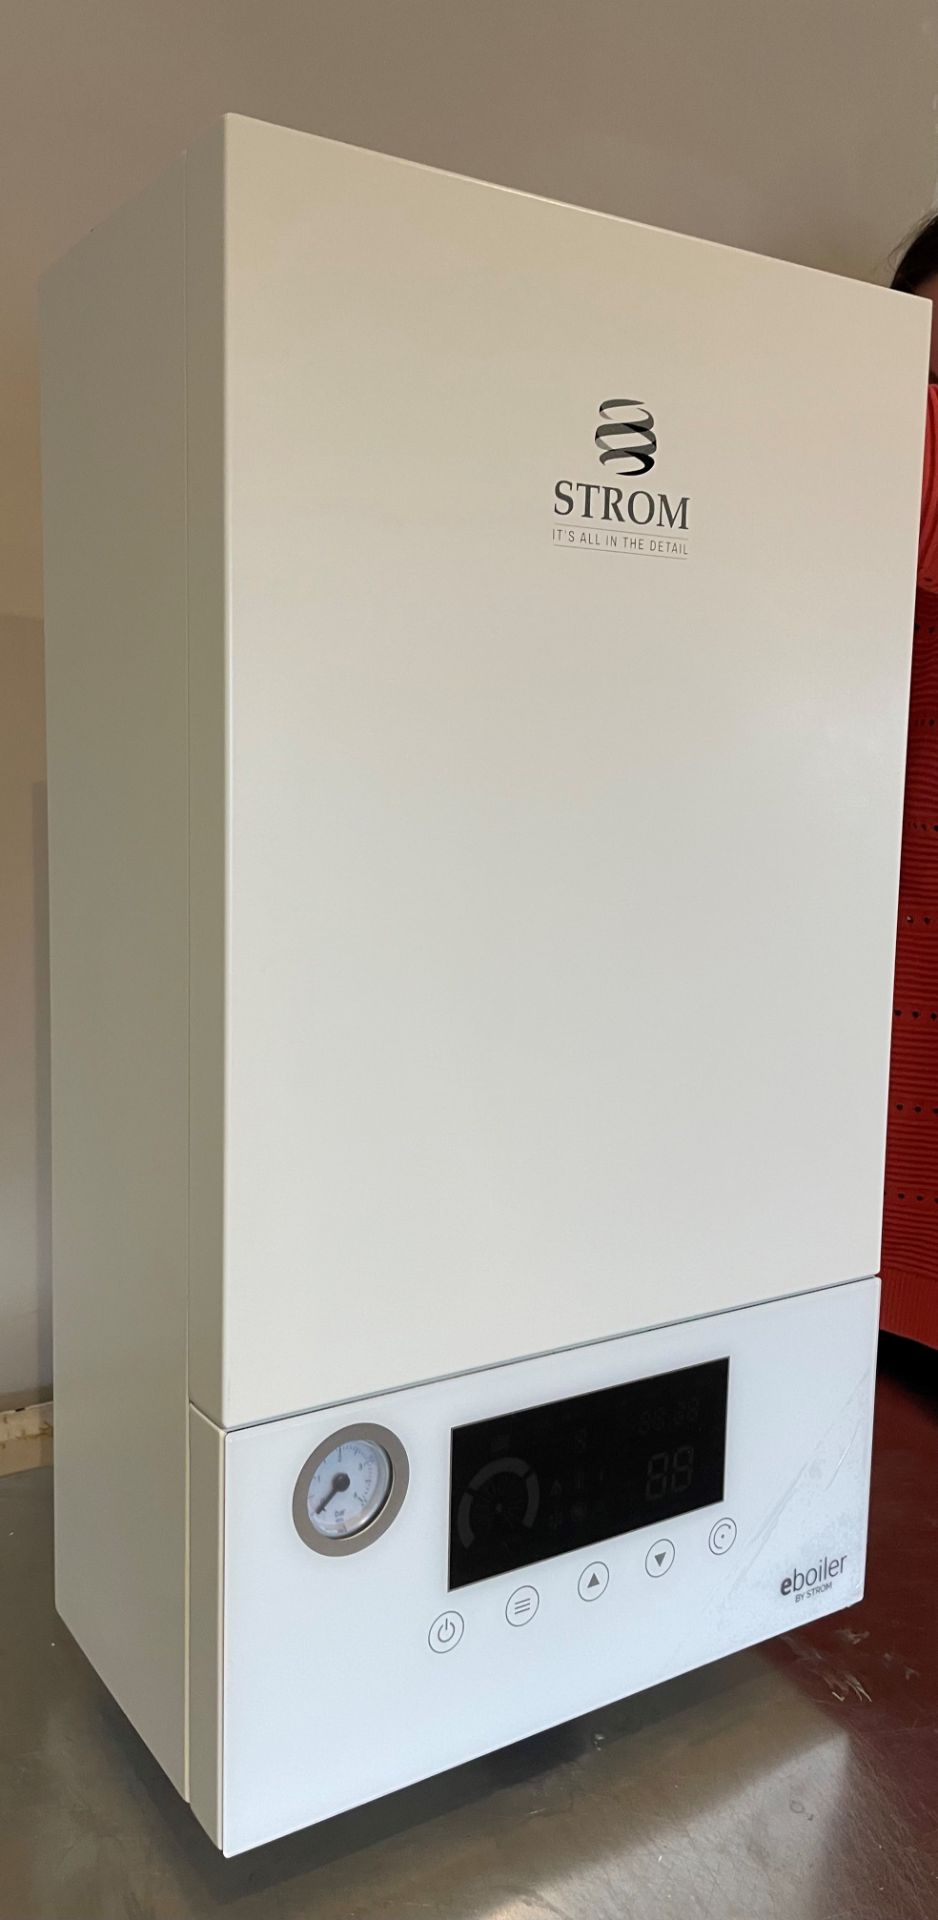 New Strom SBTP24S 3-Phase Electric System Boiler Compact and stylish boiler with quiet operation and - Image 6 of 13